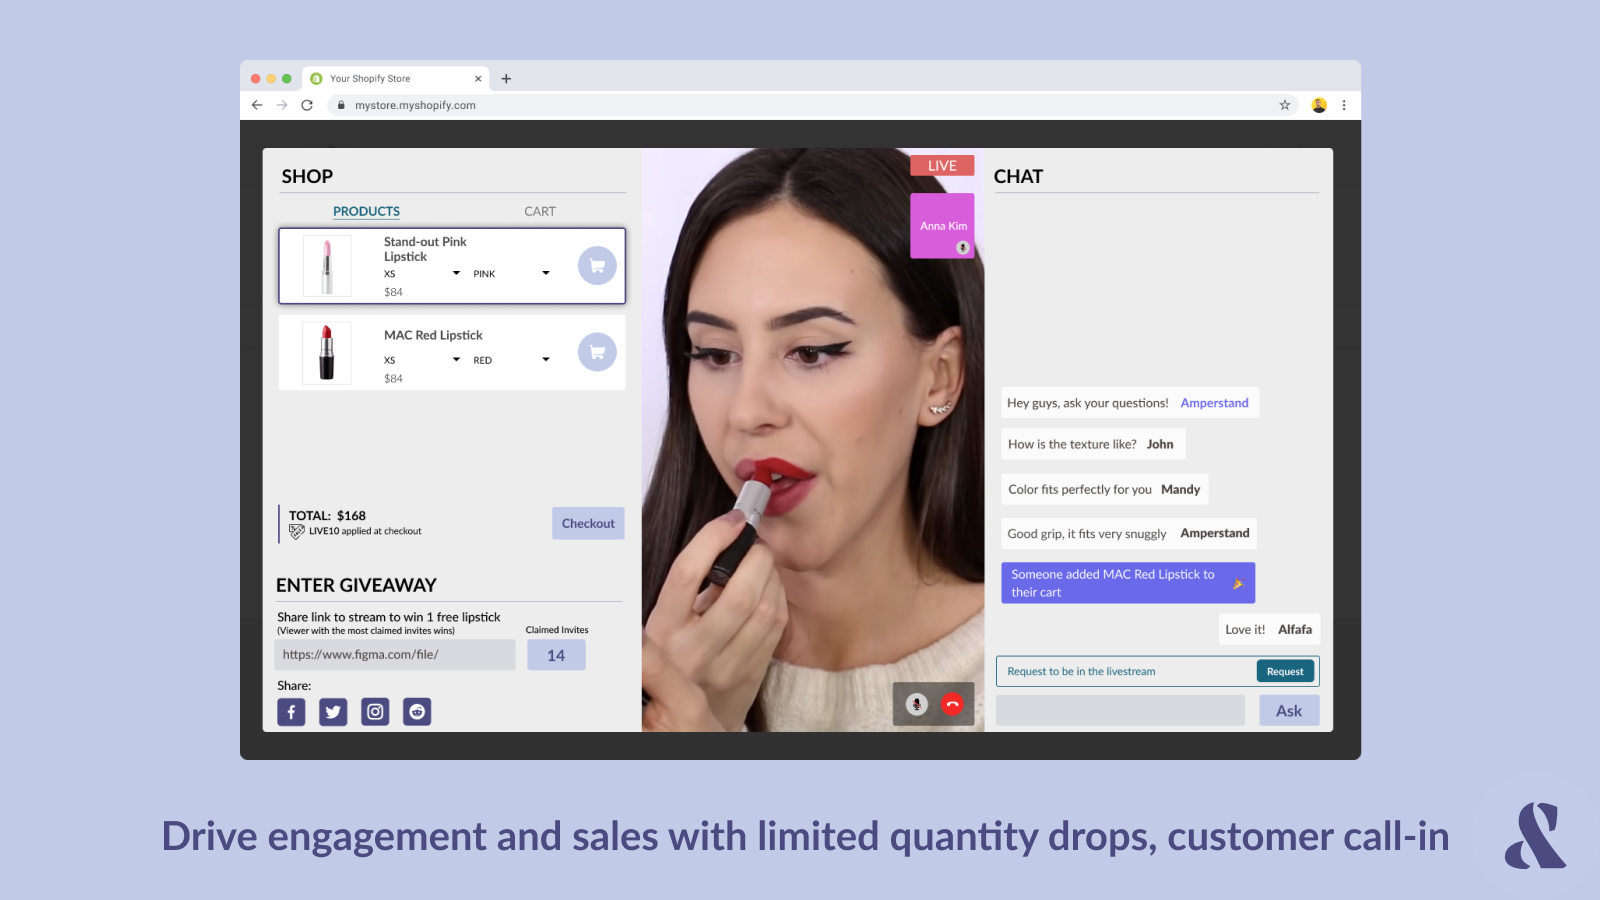 Drive sales with limited quantity drops, customer call-in